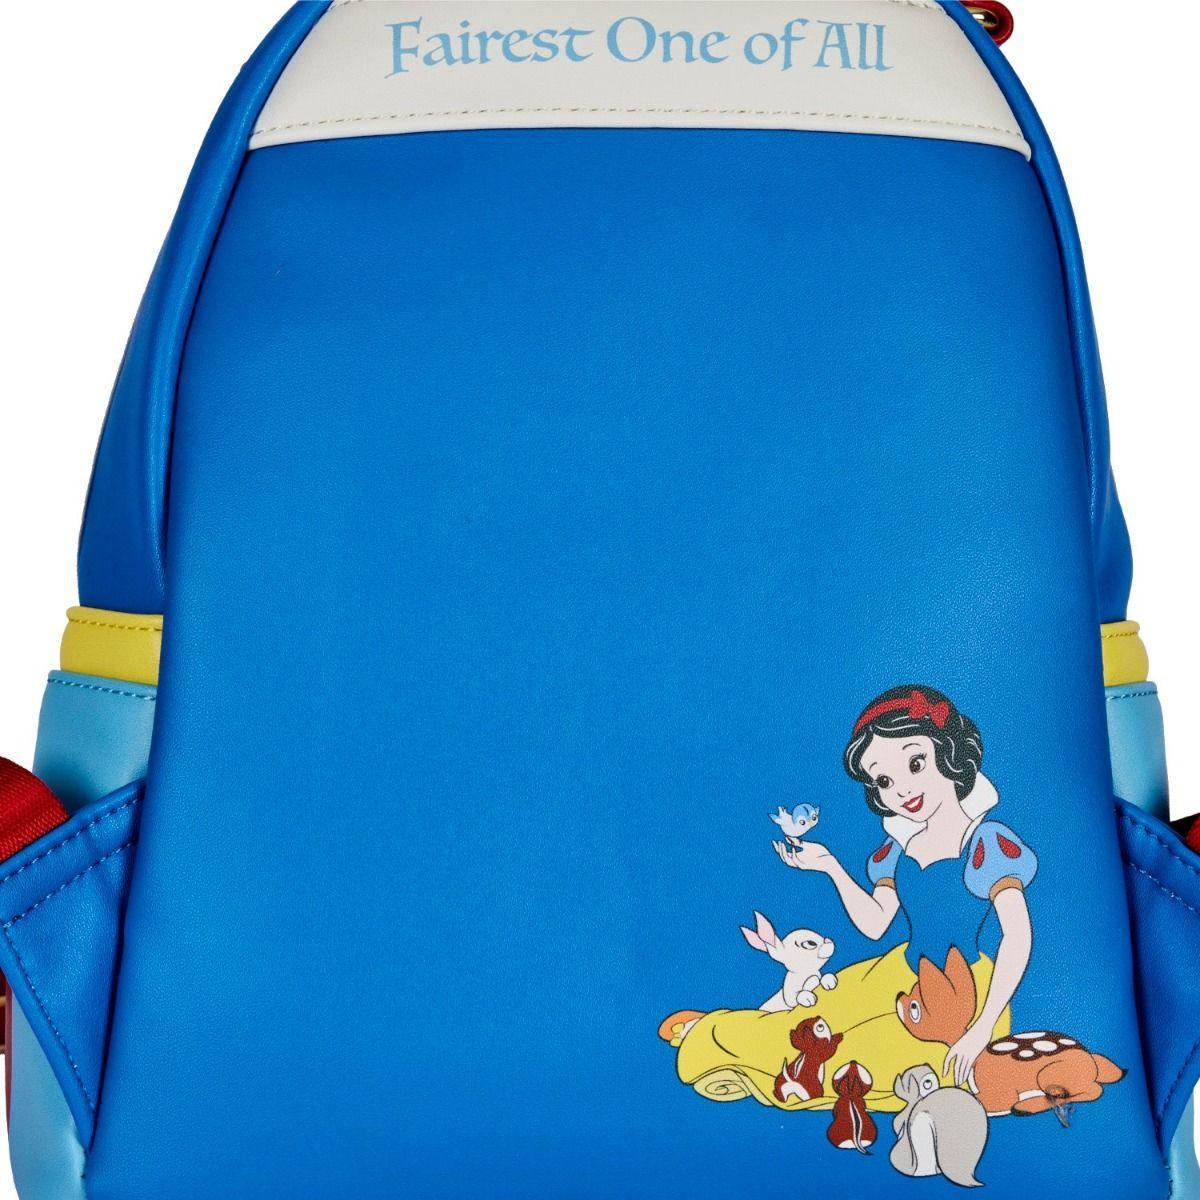 LOUWDBK2137 Snow White and the Seven Dwarfs - Bow Handle Mini Backpack - Loungefly - Titan Pop Culture